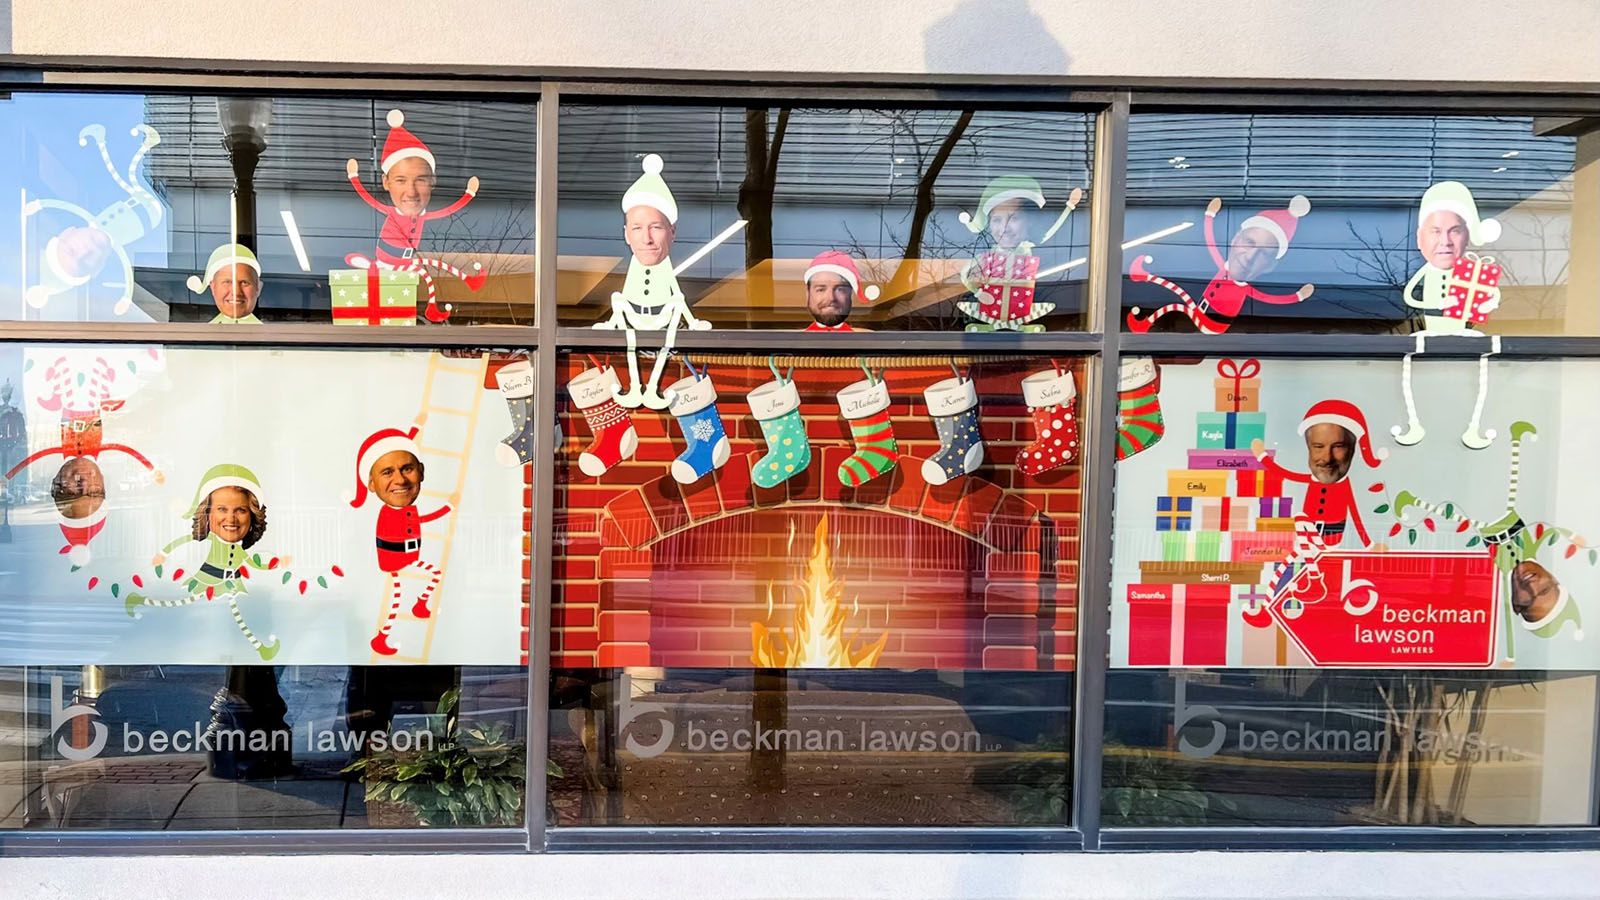 The window display at Beckman Lawson LLP won first place in People’s Choice voting.